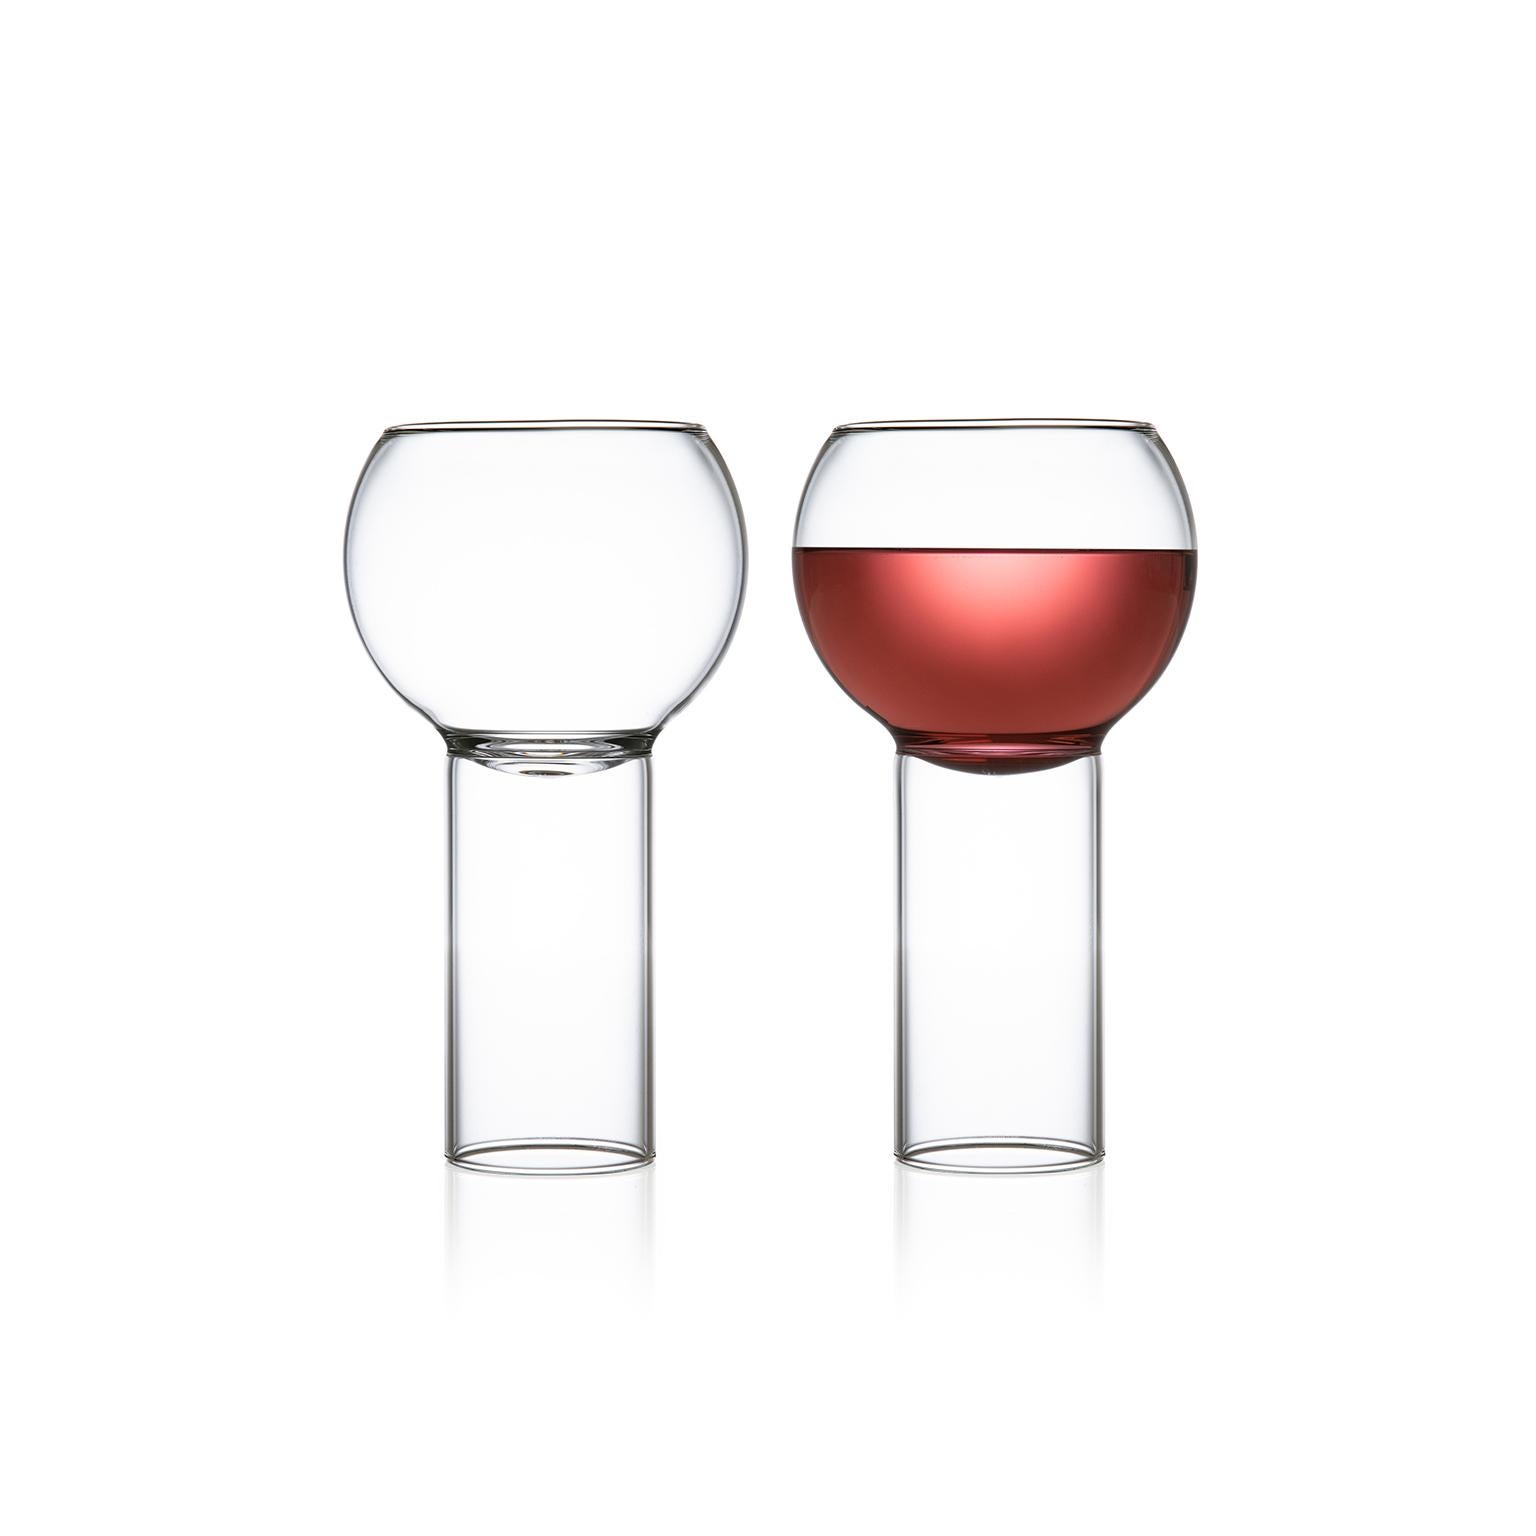 Tulip tall small, set of two.

The Tulip collection was inspired by the small bistro wine glasses found in European bars and cafes. The bowl of the glass sits down into the cylindrical stem, highlighting the intersection between the two. With